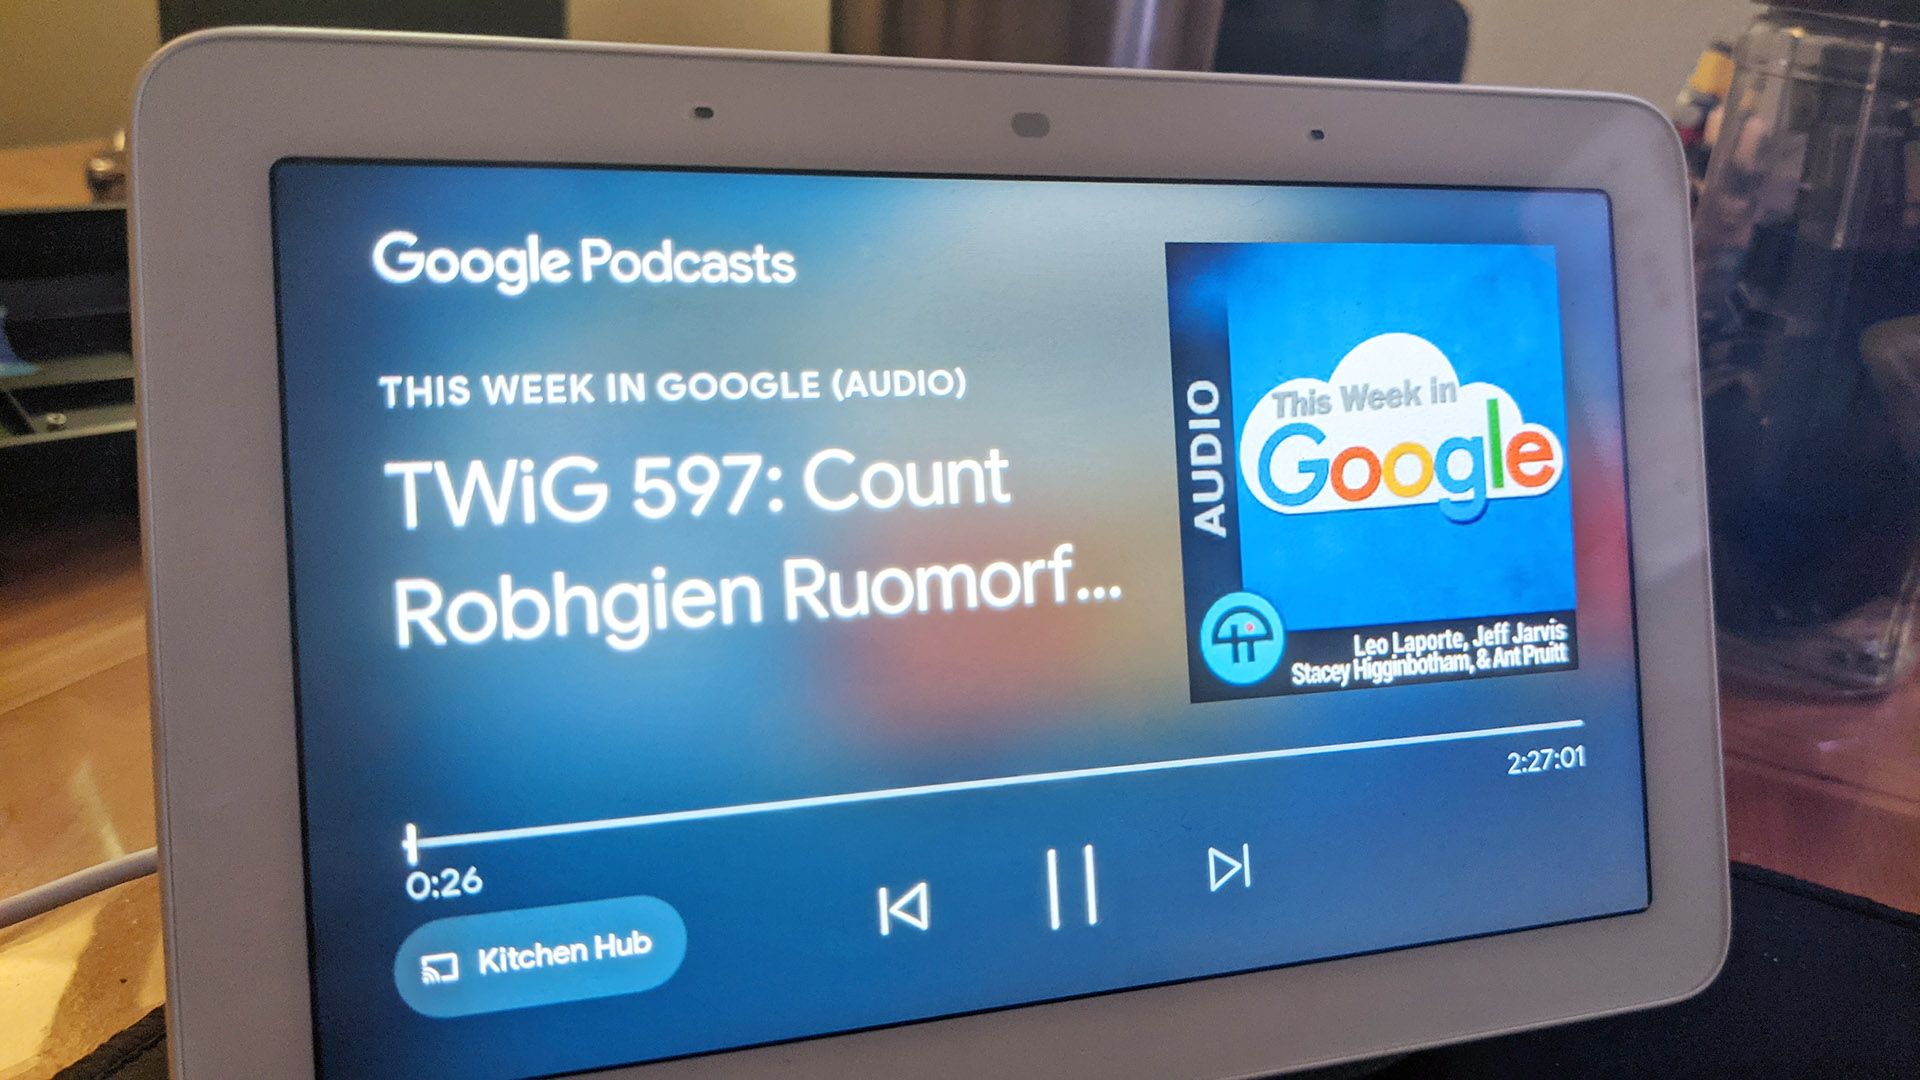 Google Podcasts on the Google Home screen